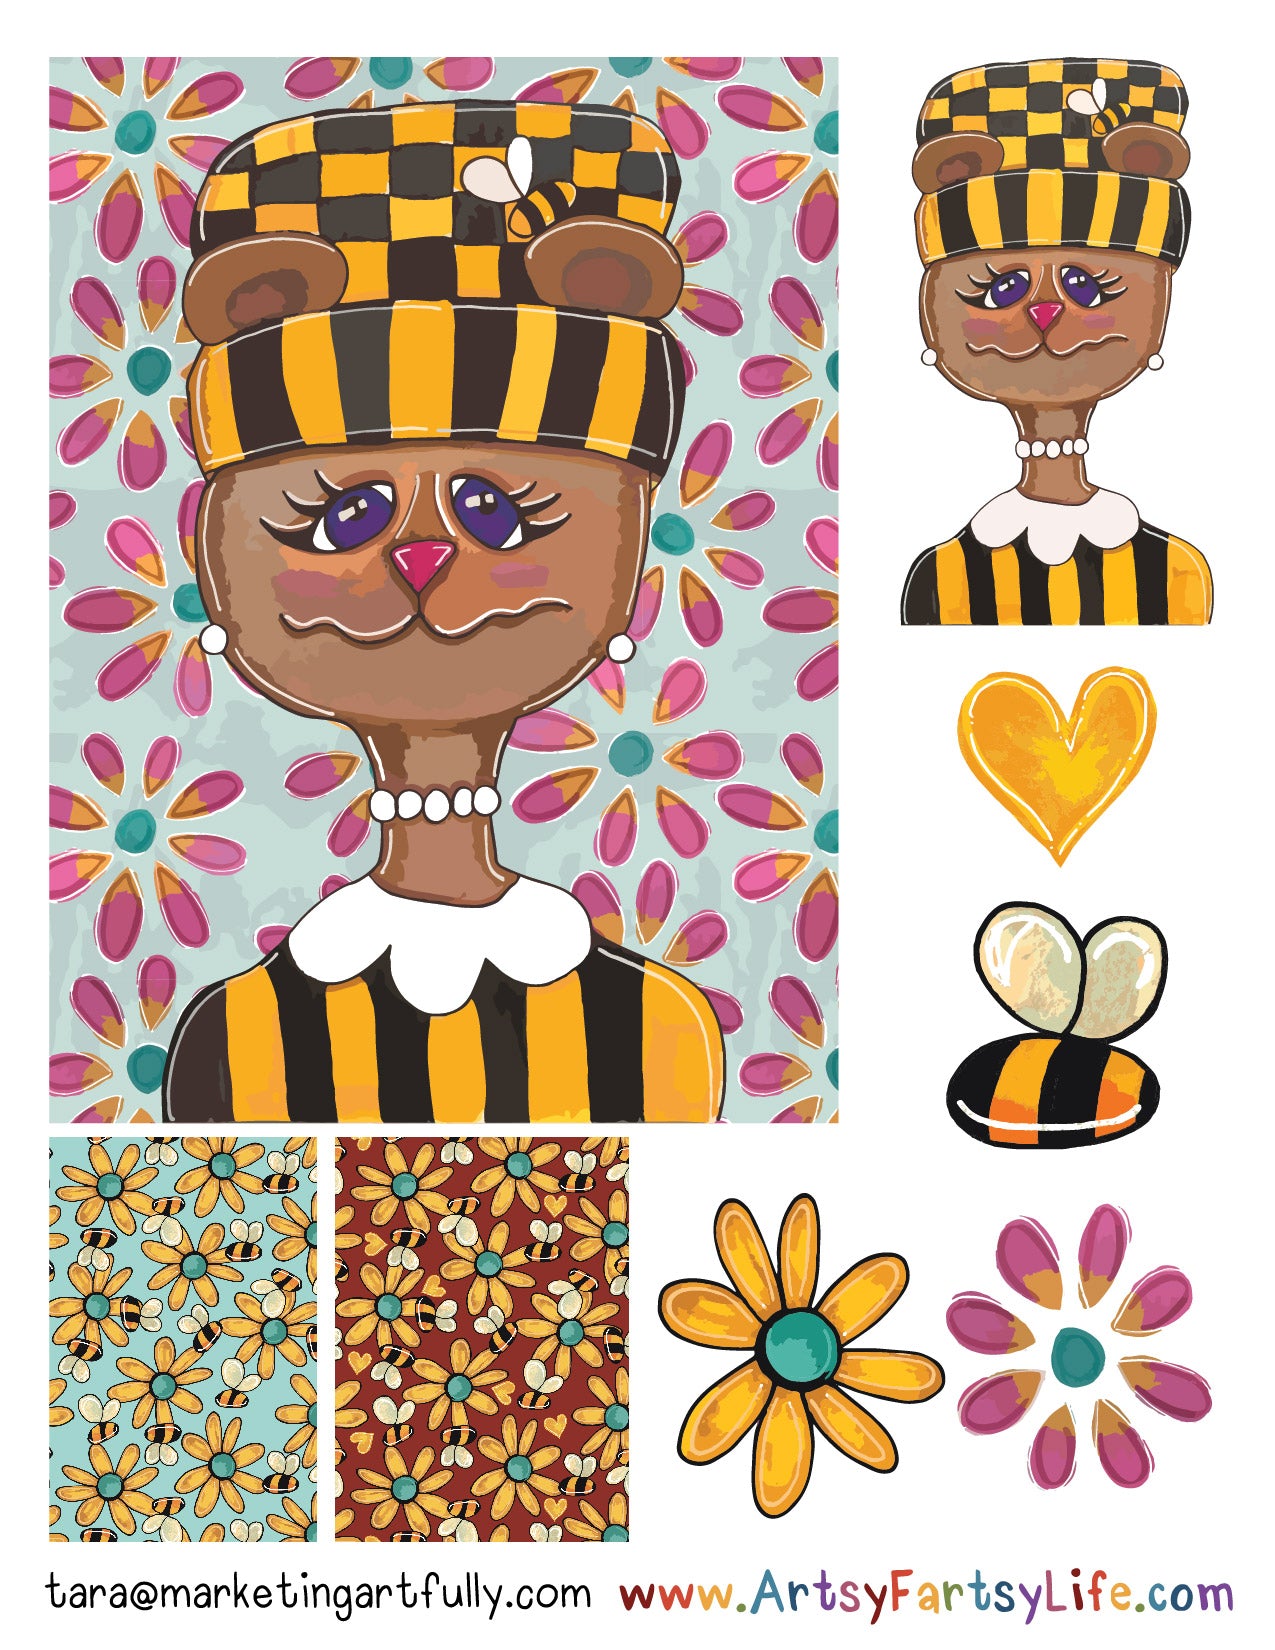 Lady Bee Bear Surface Design for Greeting Cards and Stationery